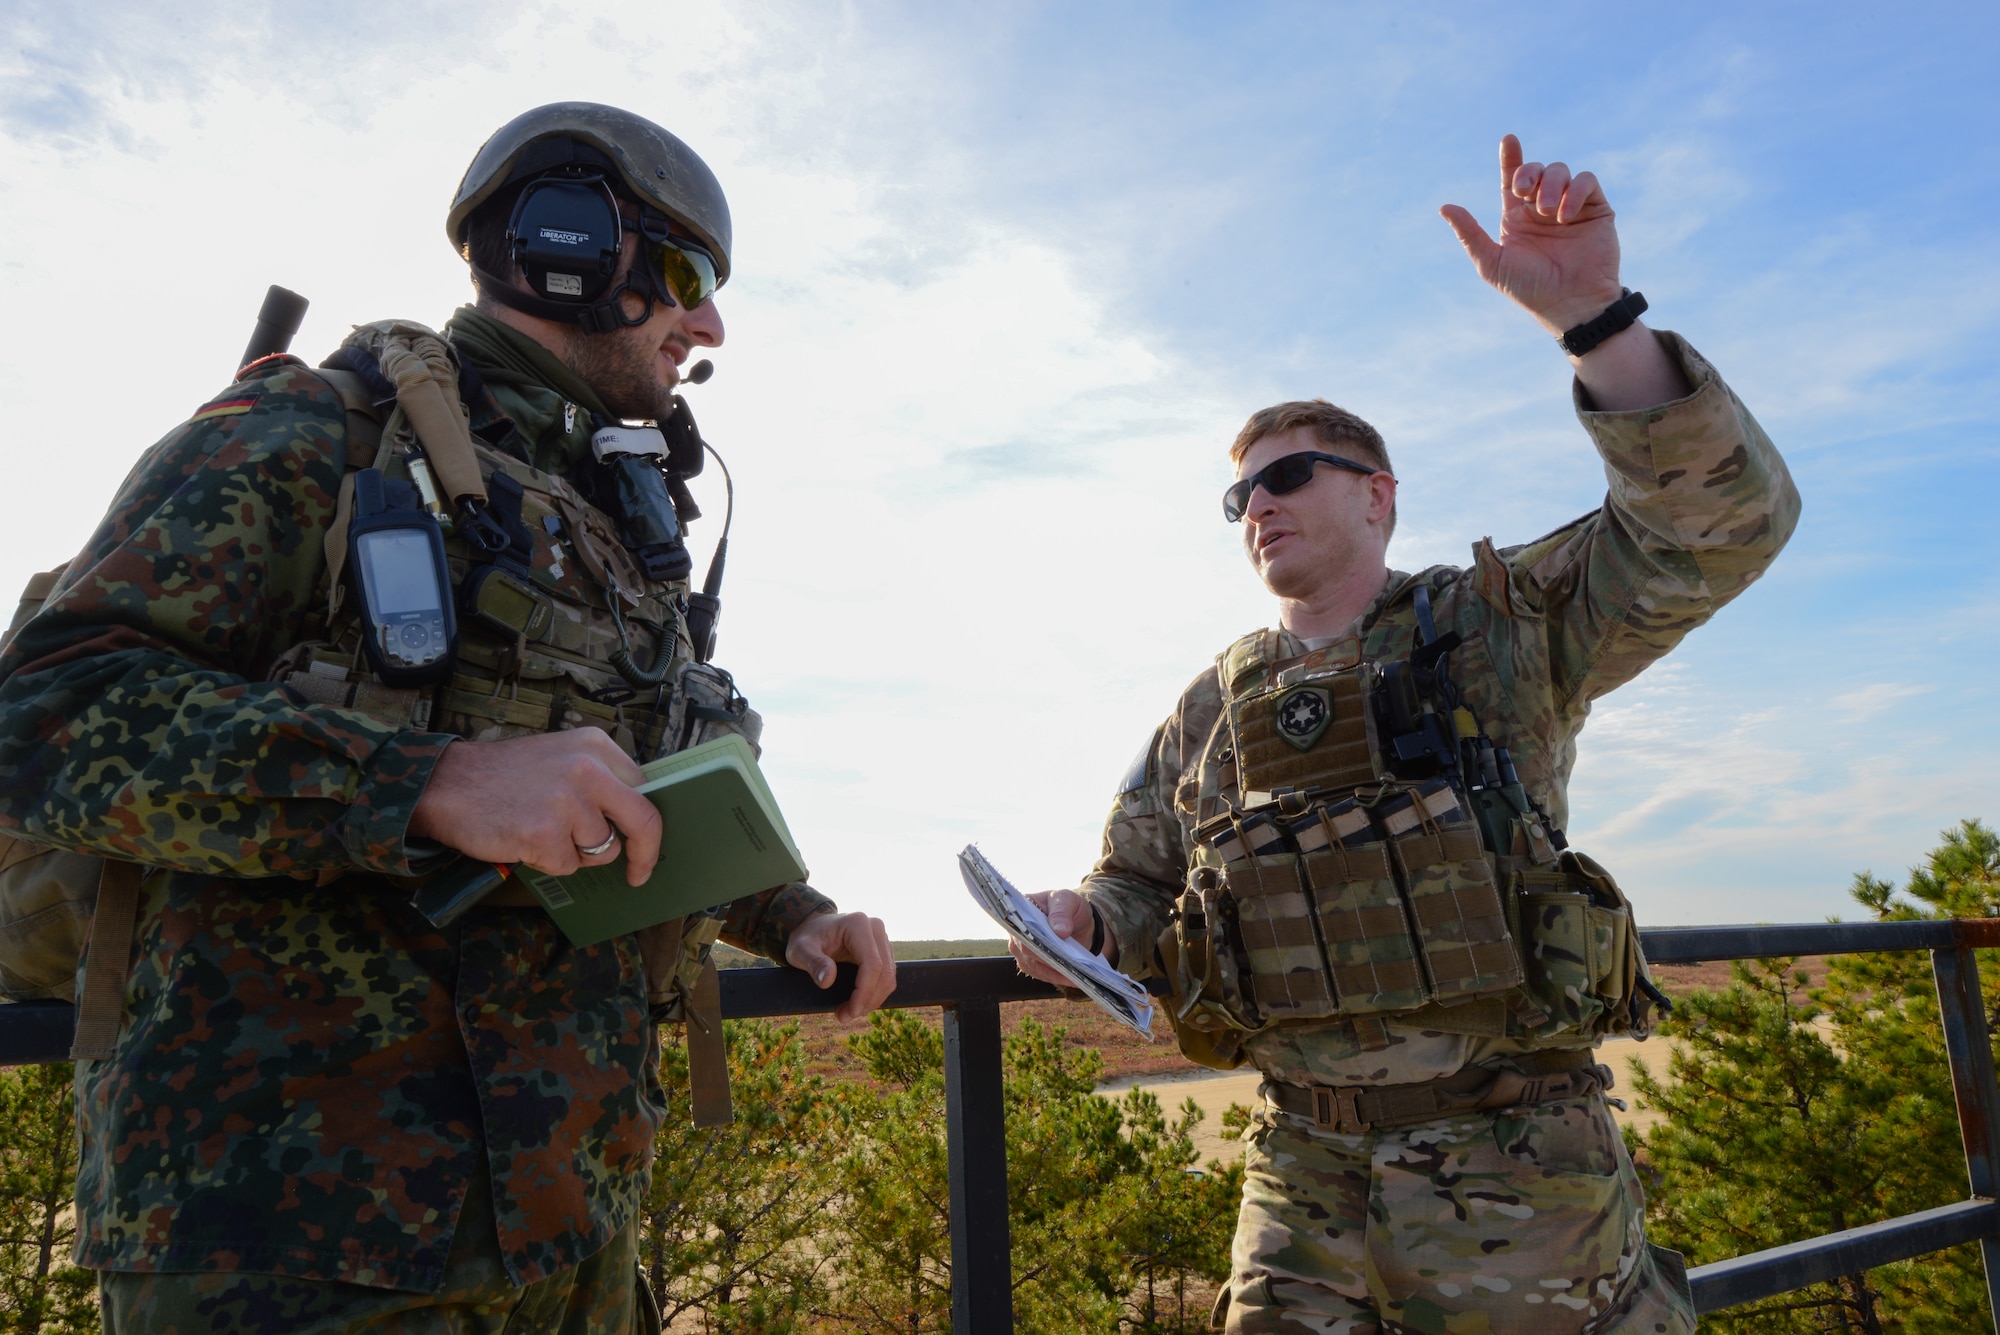 A picture of U.S. Air Force Capt. Keith Giamberardino, Joint Terminal Attack Controller (JTAC) with the 227th Air Support Operations Squadron (ASOS), and German armed forces JTAC 1st Lt. Marius Sokol discussing areas for improvement after close air support (CAS) training.